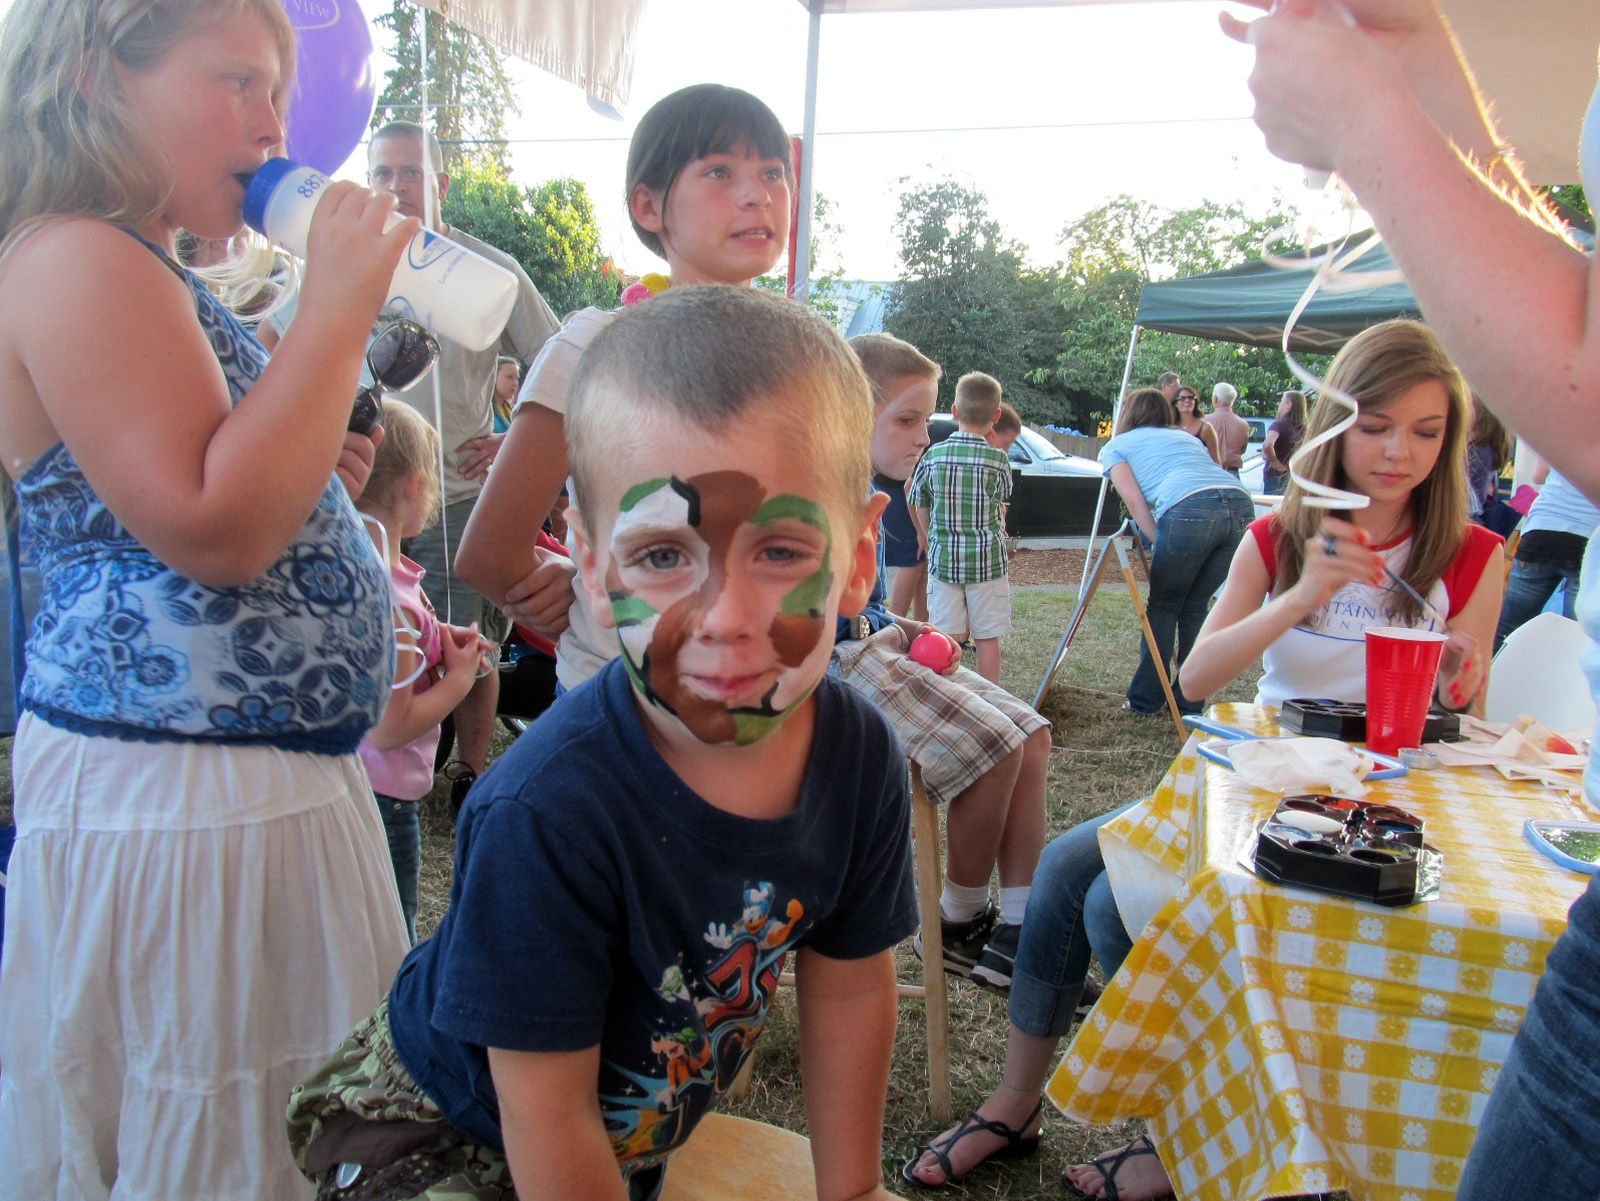 Ridgefield: Bryson Scanapico, 3, gets his face painted during Ridgefield's 7th annual National Night Out celebration.